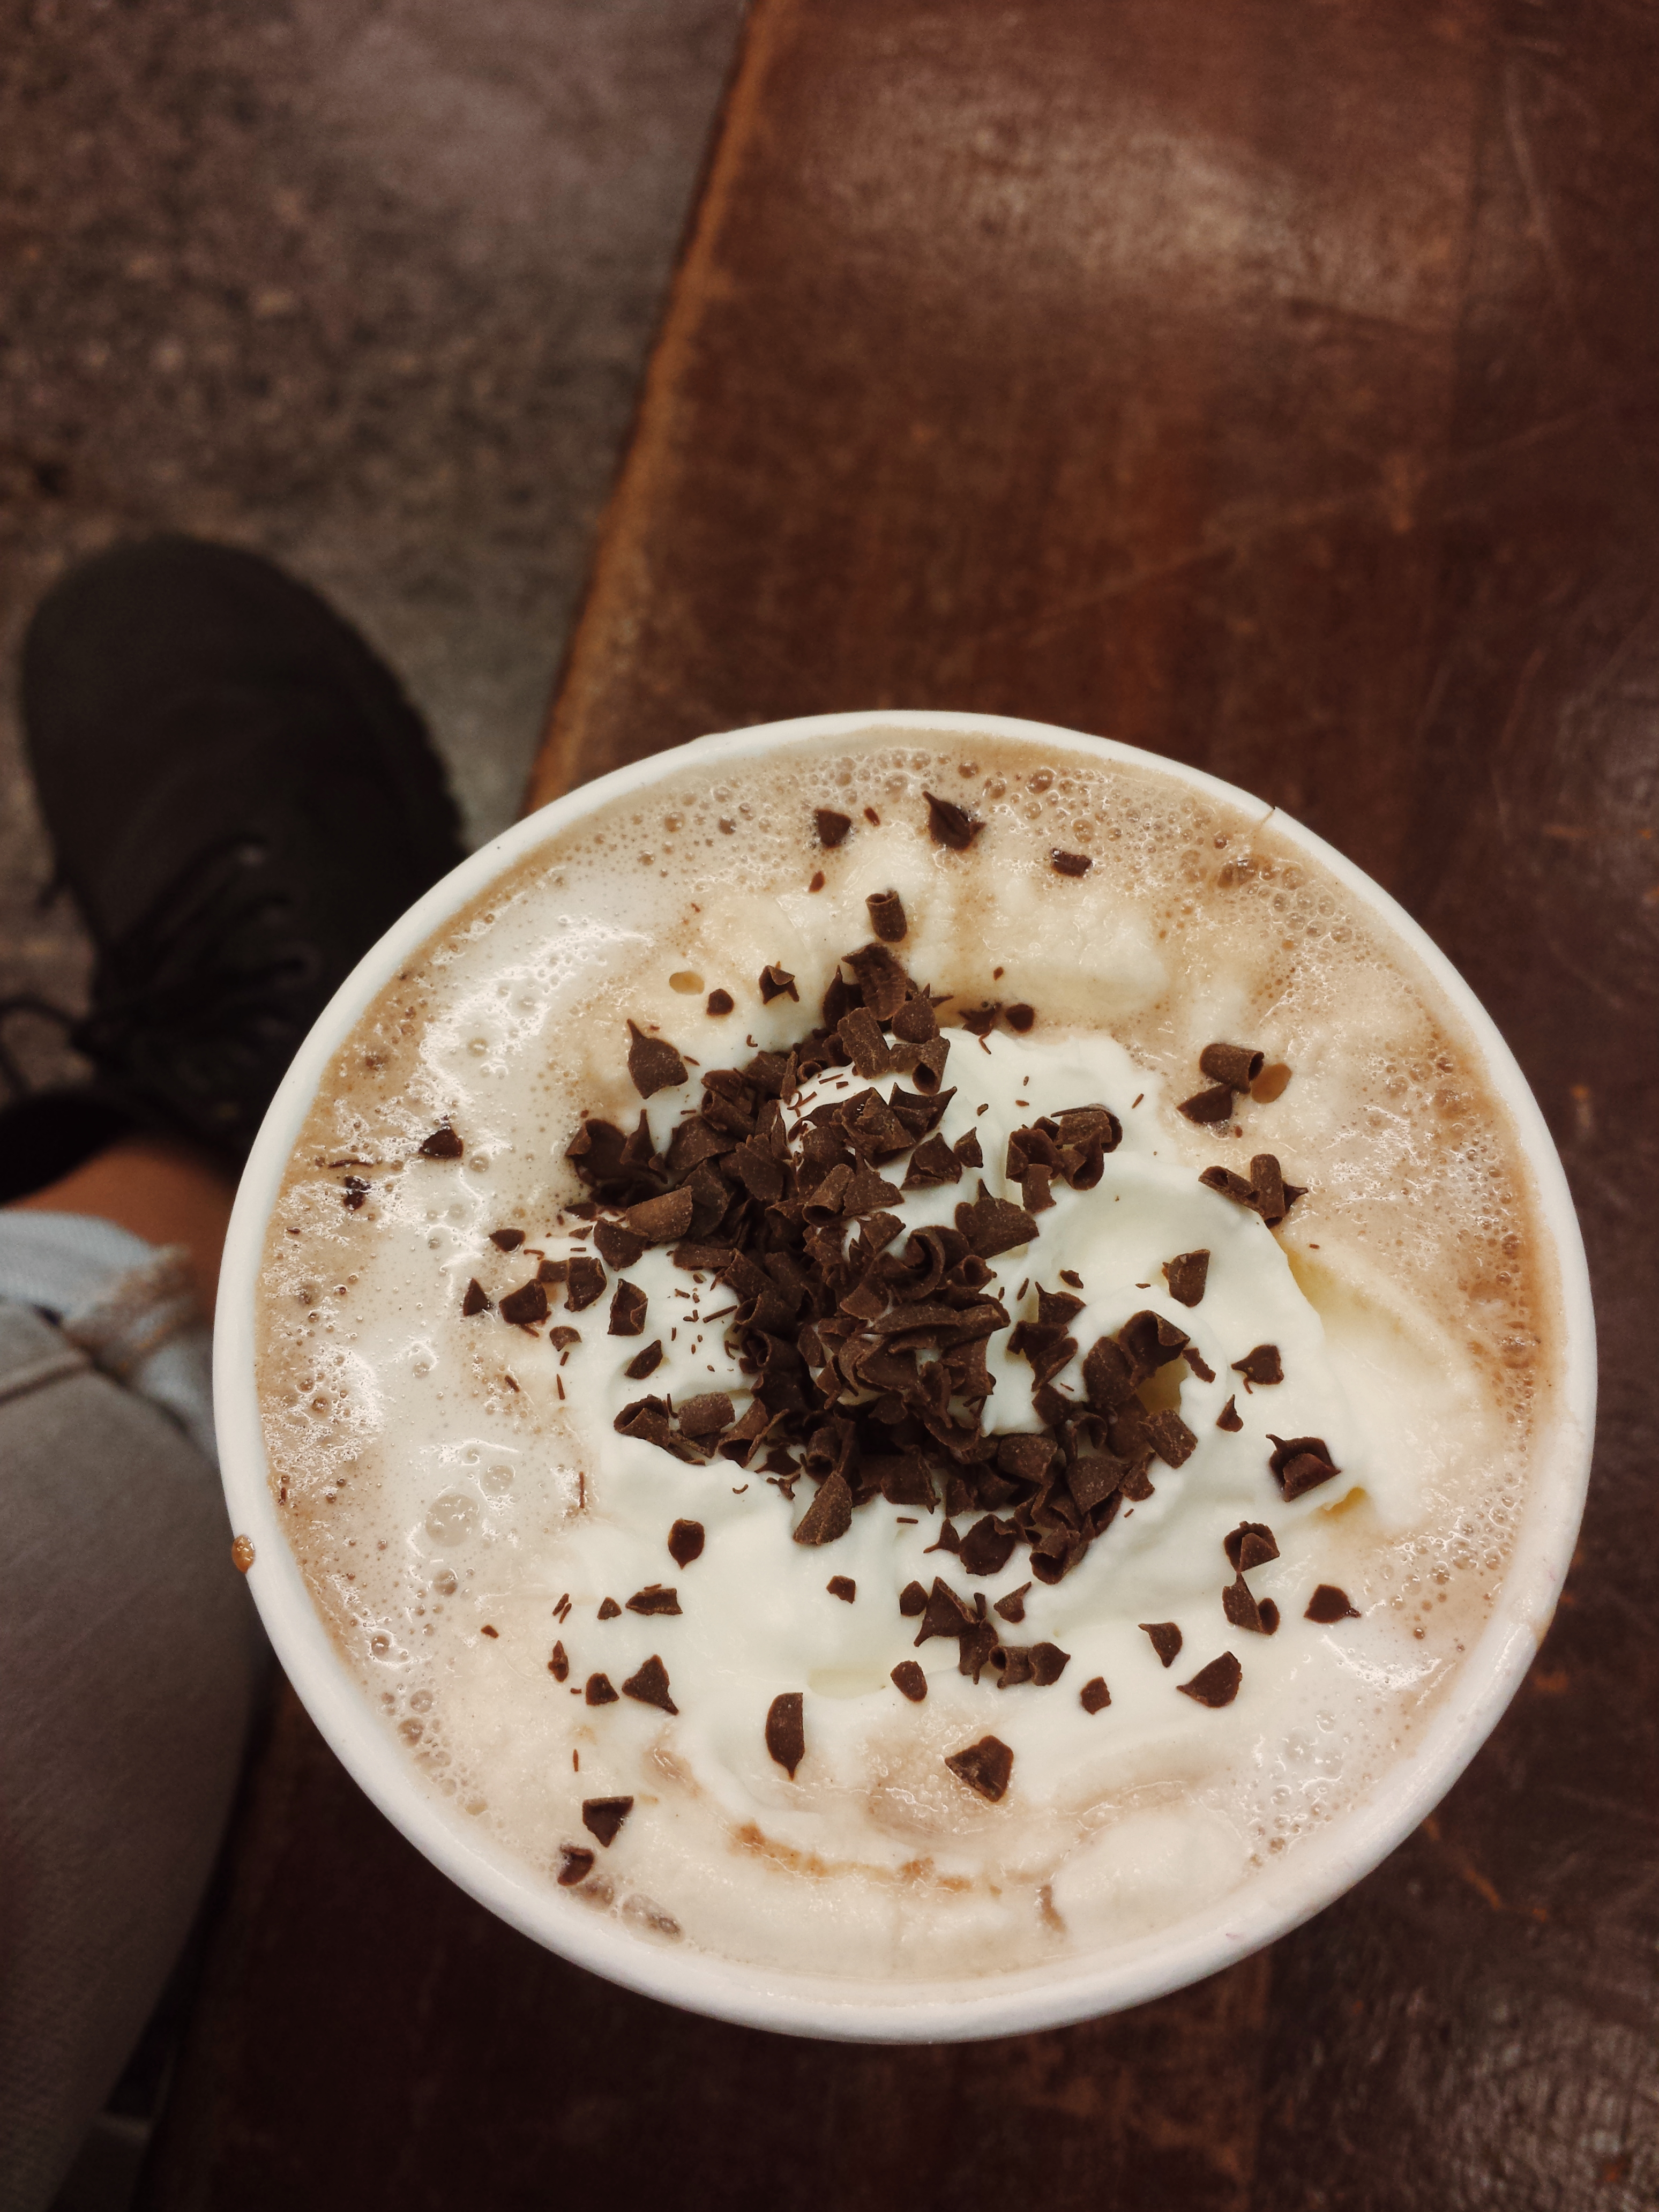 Close-up of a Starbucks Peppermint Mocha with whipped cream and chocolate shavings.